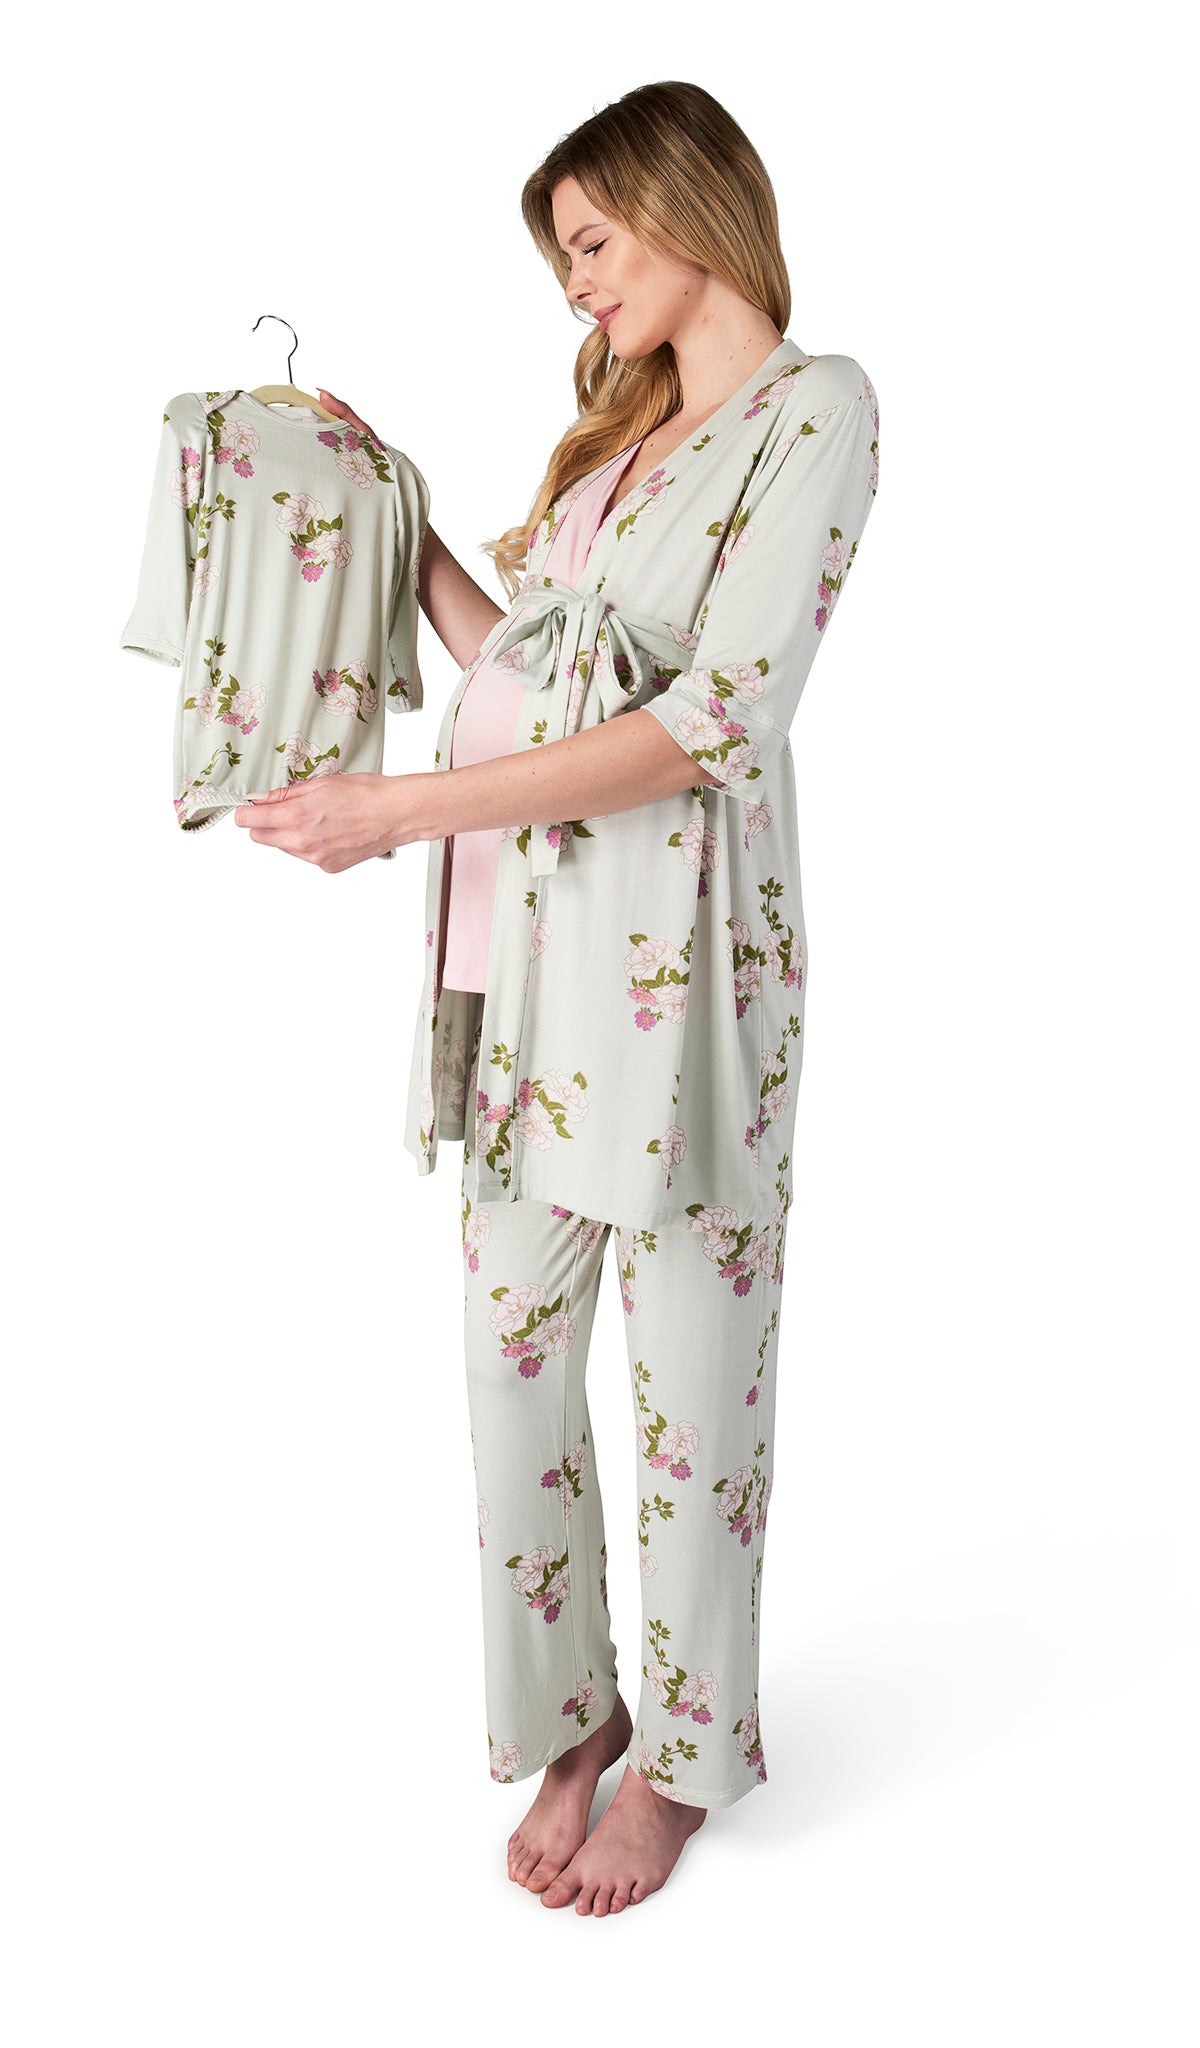 Peony Analise 5-Piece Set. Pregnant woman wearing 3/4 sleeve robe, tank top and pant while holding a baby gown.